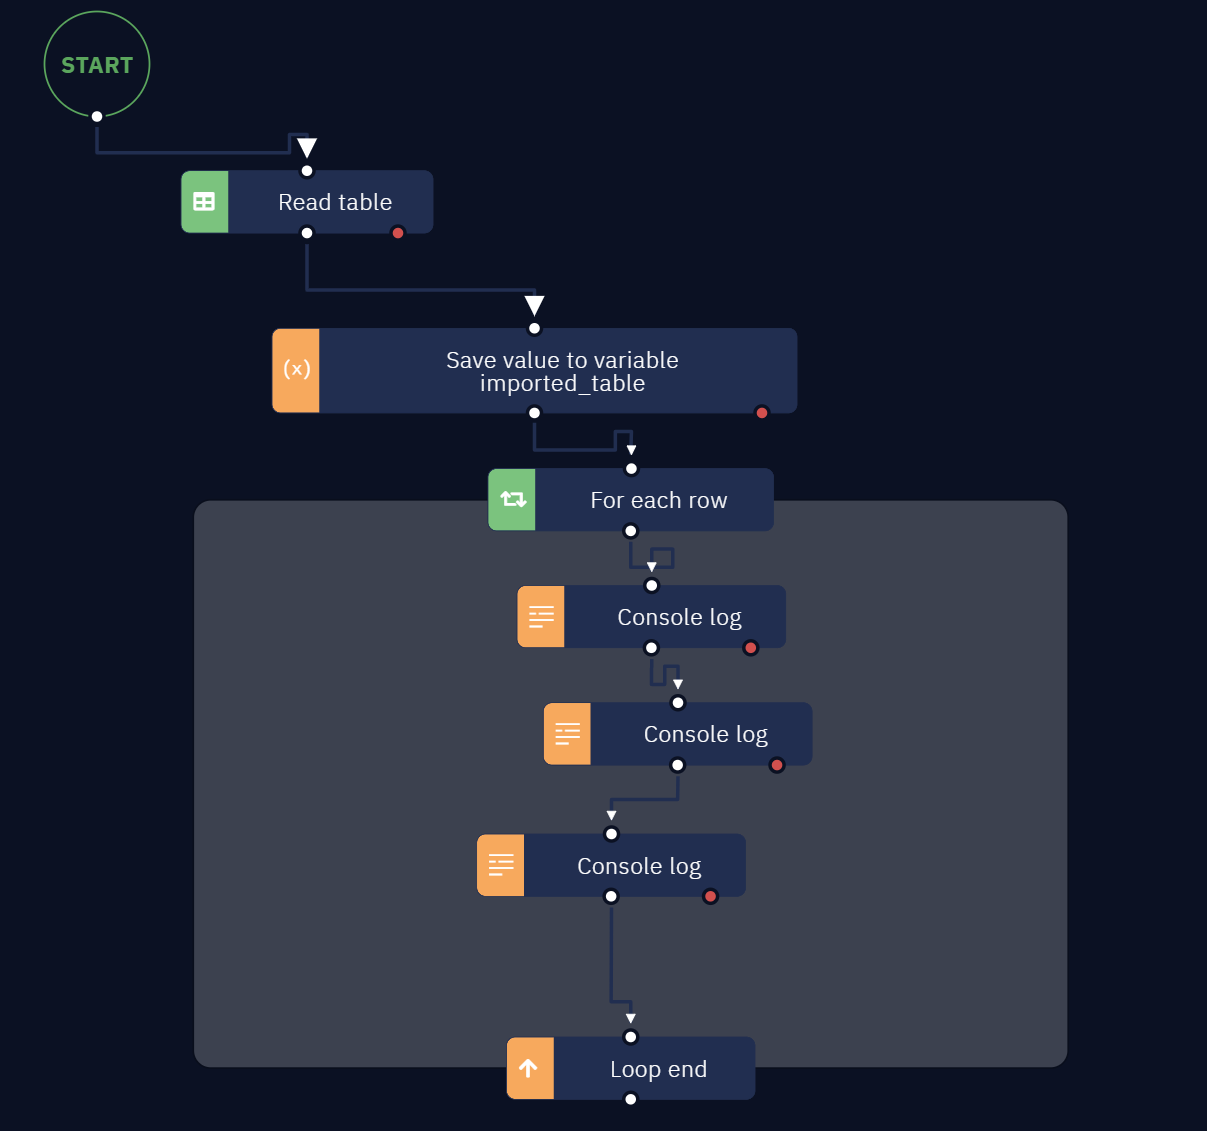 An example of a workflow with this activity